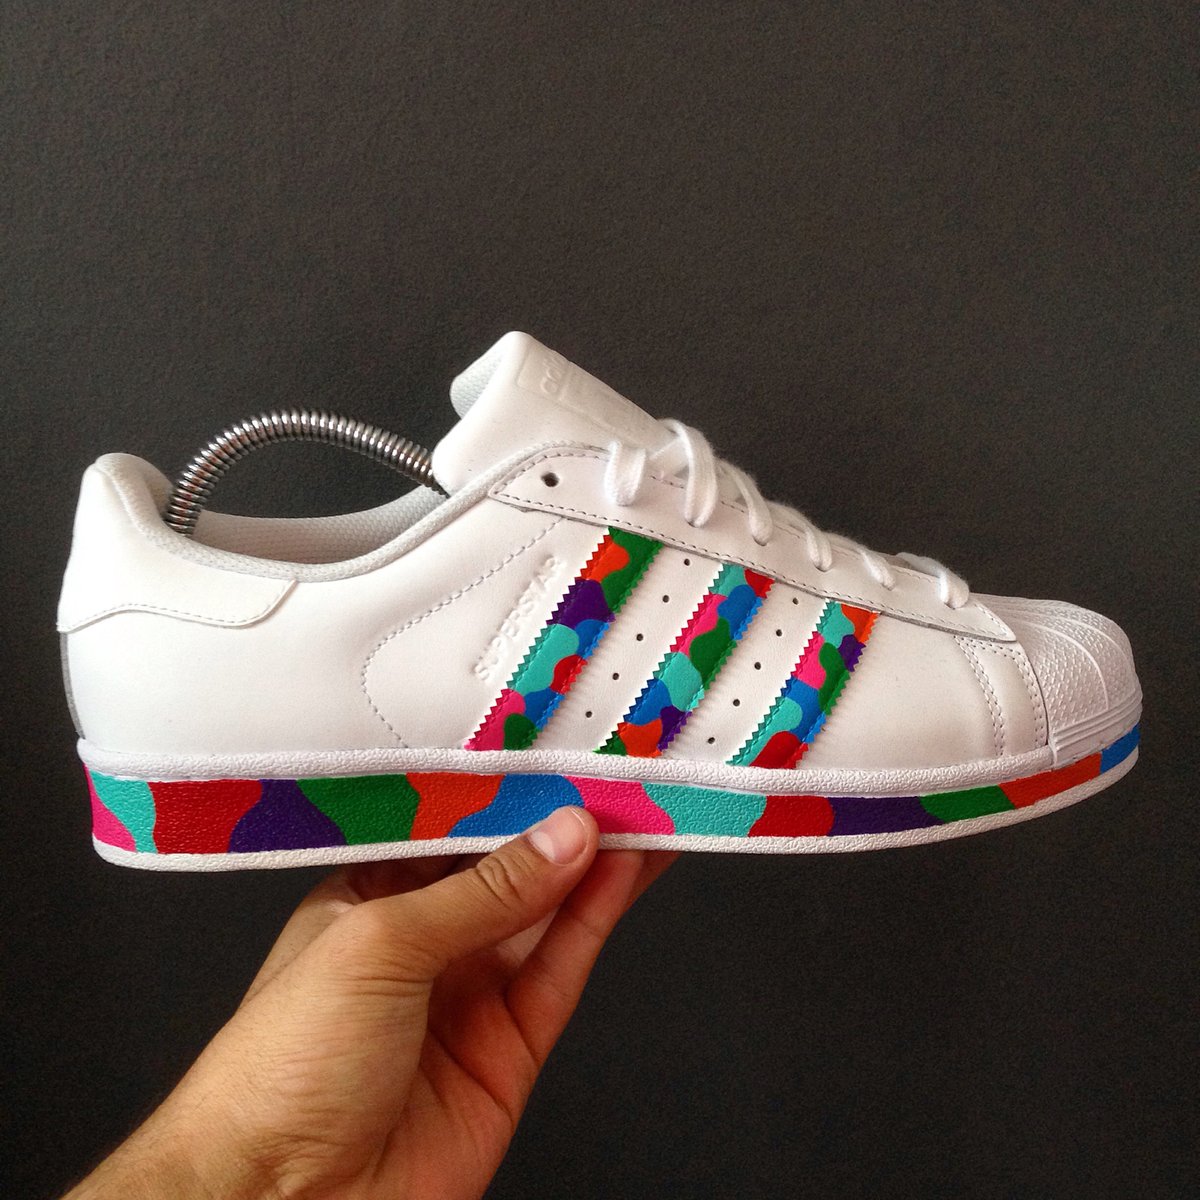 Adidas 'Full Superstar' LIMITED ONLY 1 / CKY Customs